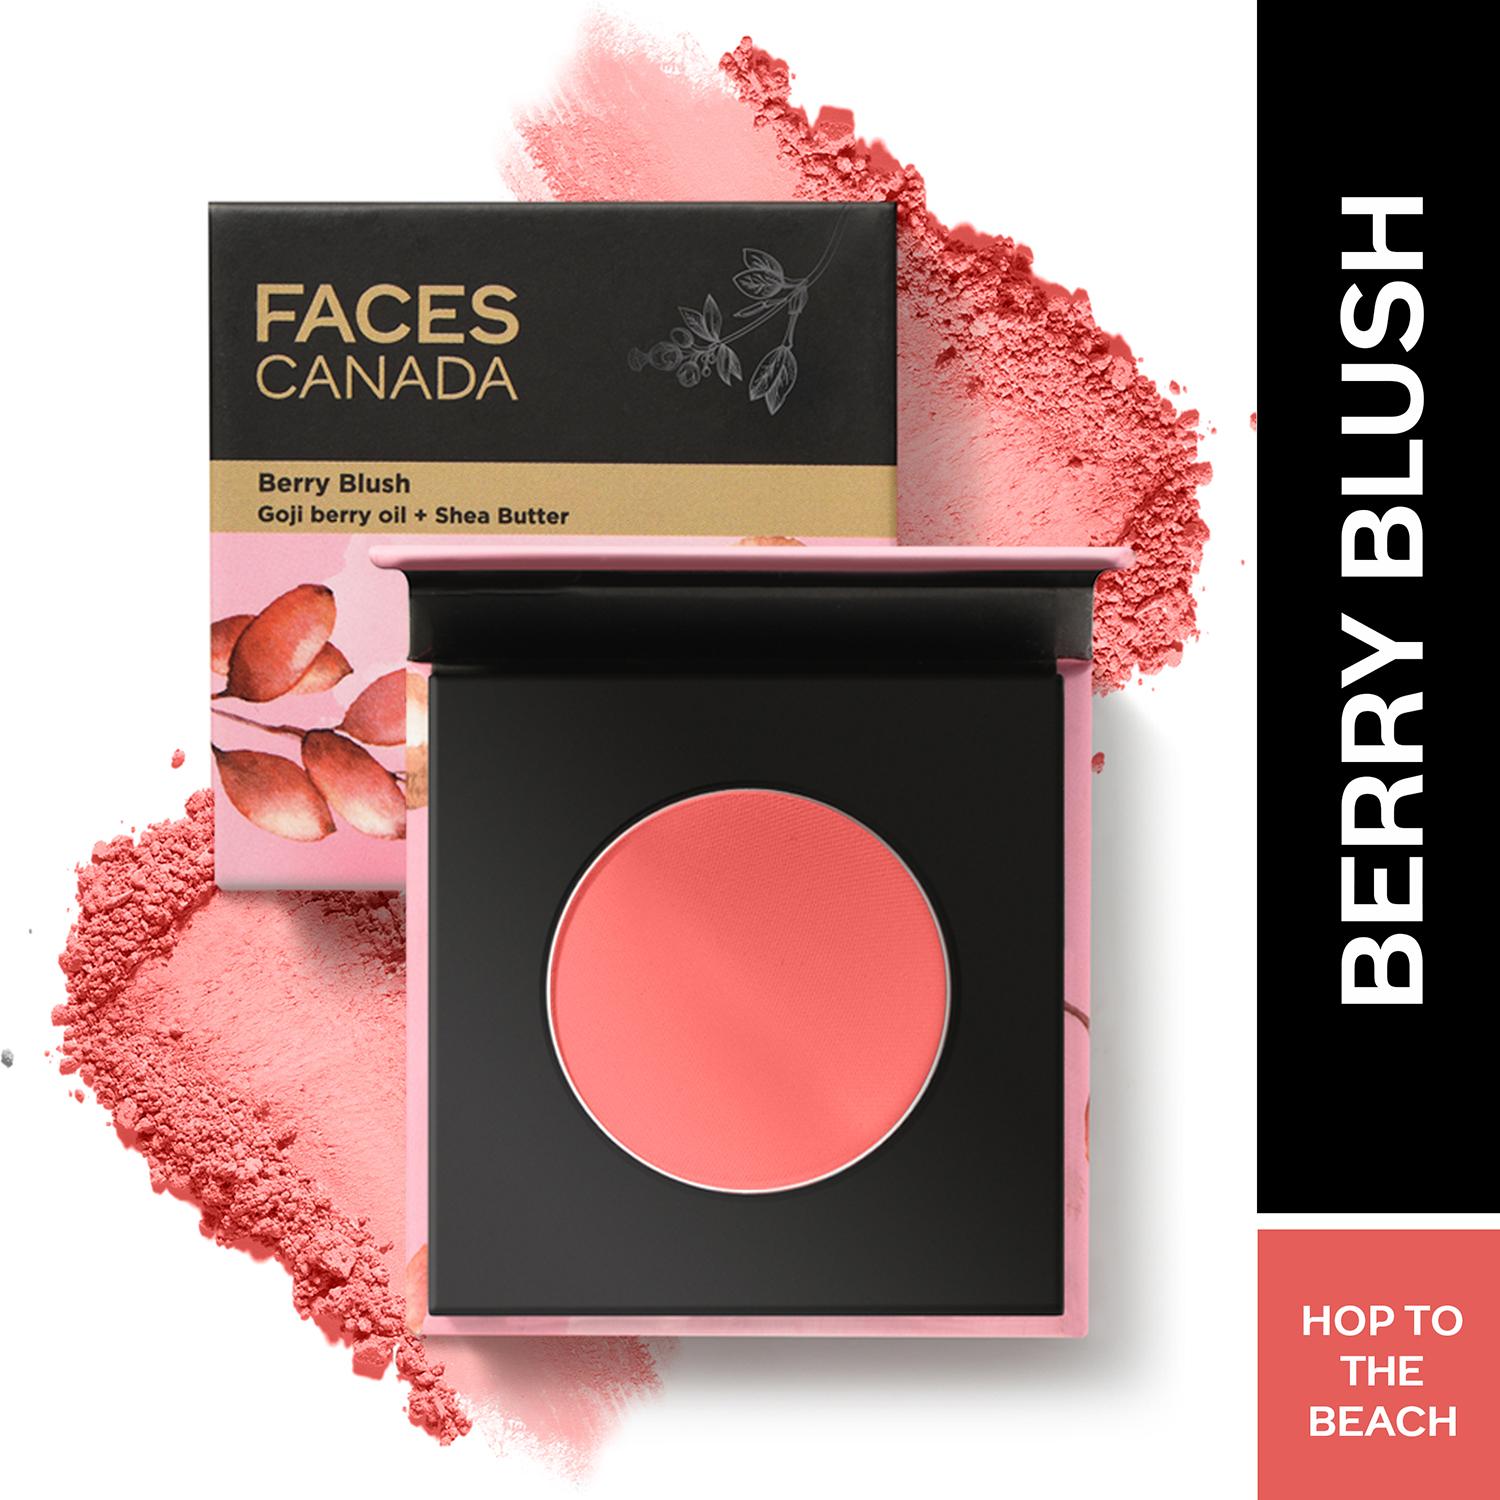 Faces Canada | Faces Canada Berry Blush - Hop To The Beach 01, Lightweight Long Lasting Ultra-Matte HD Finish (4 g)